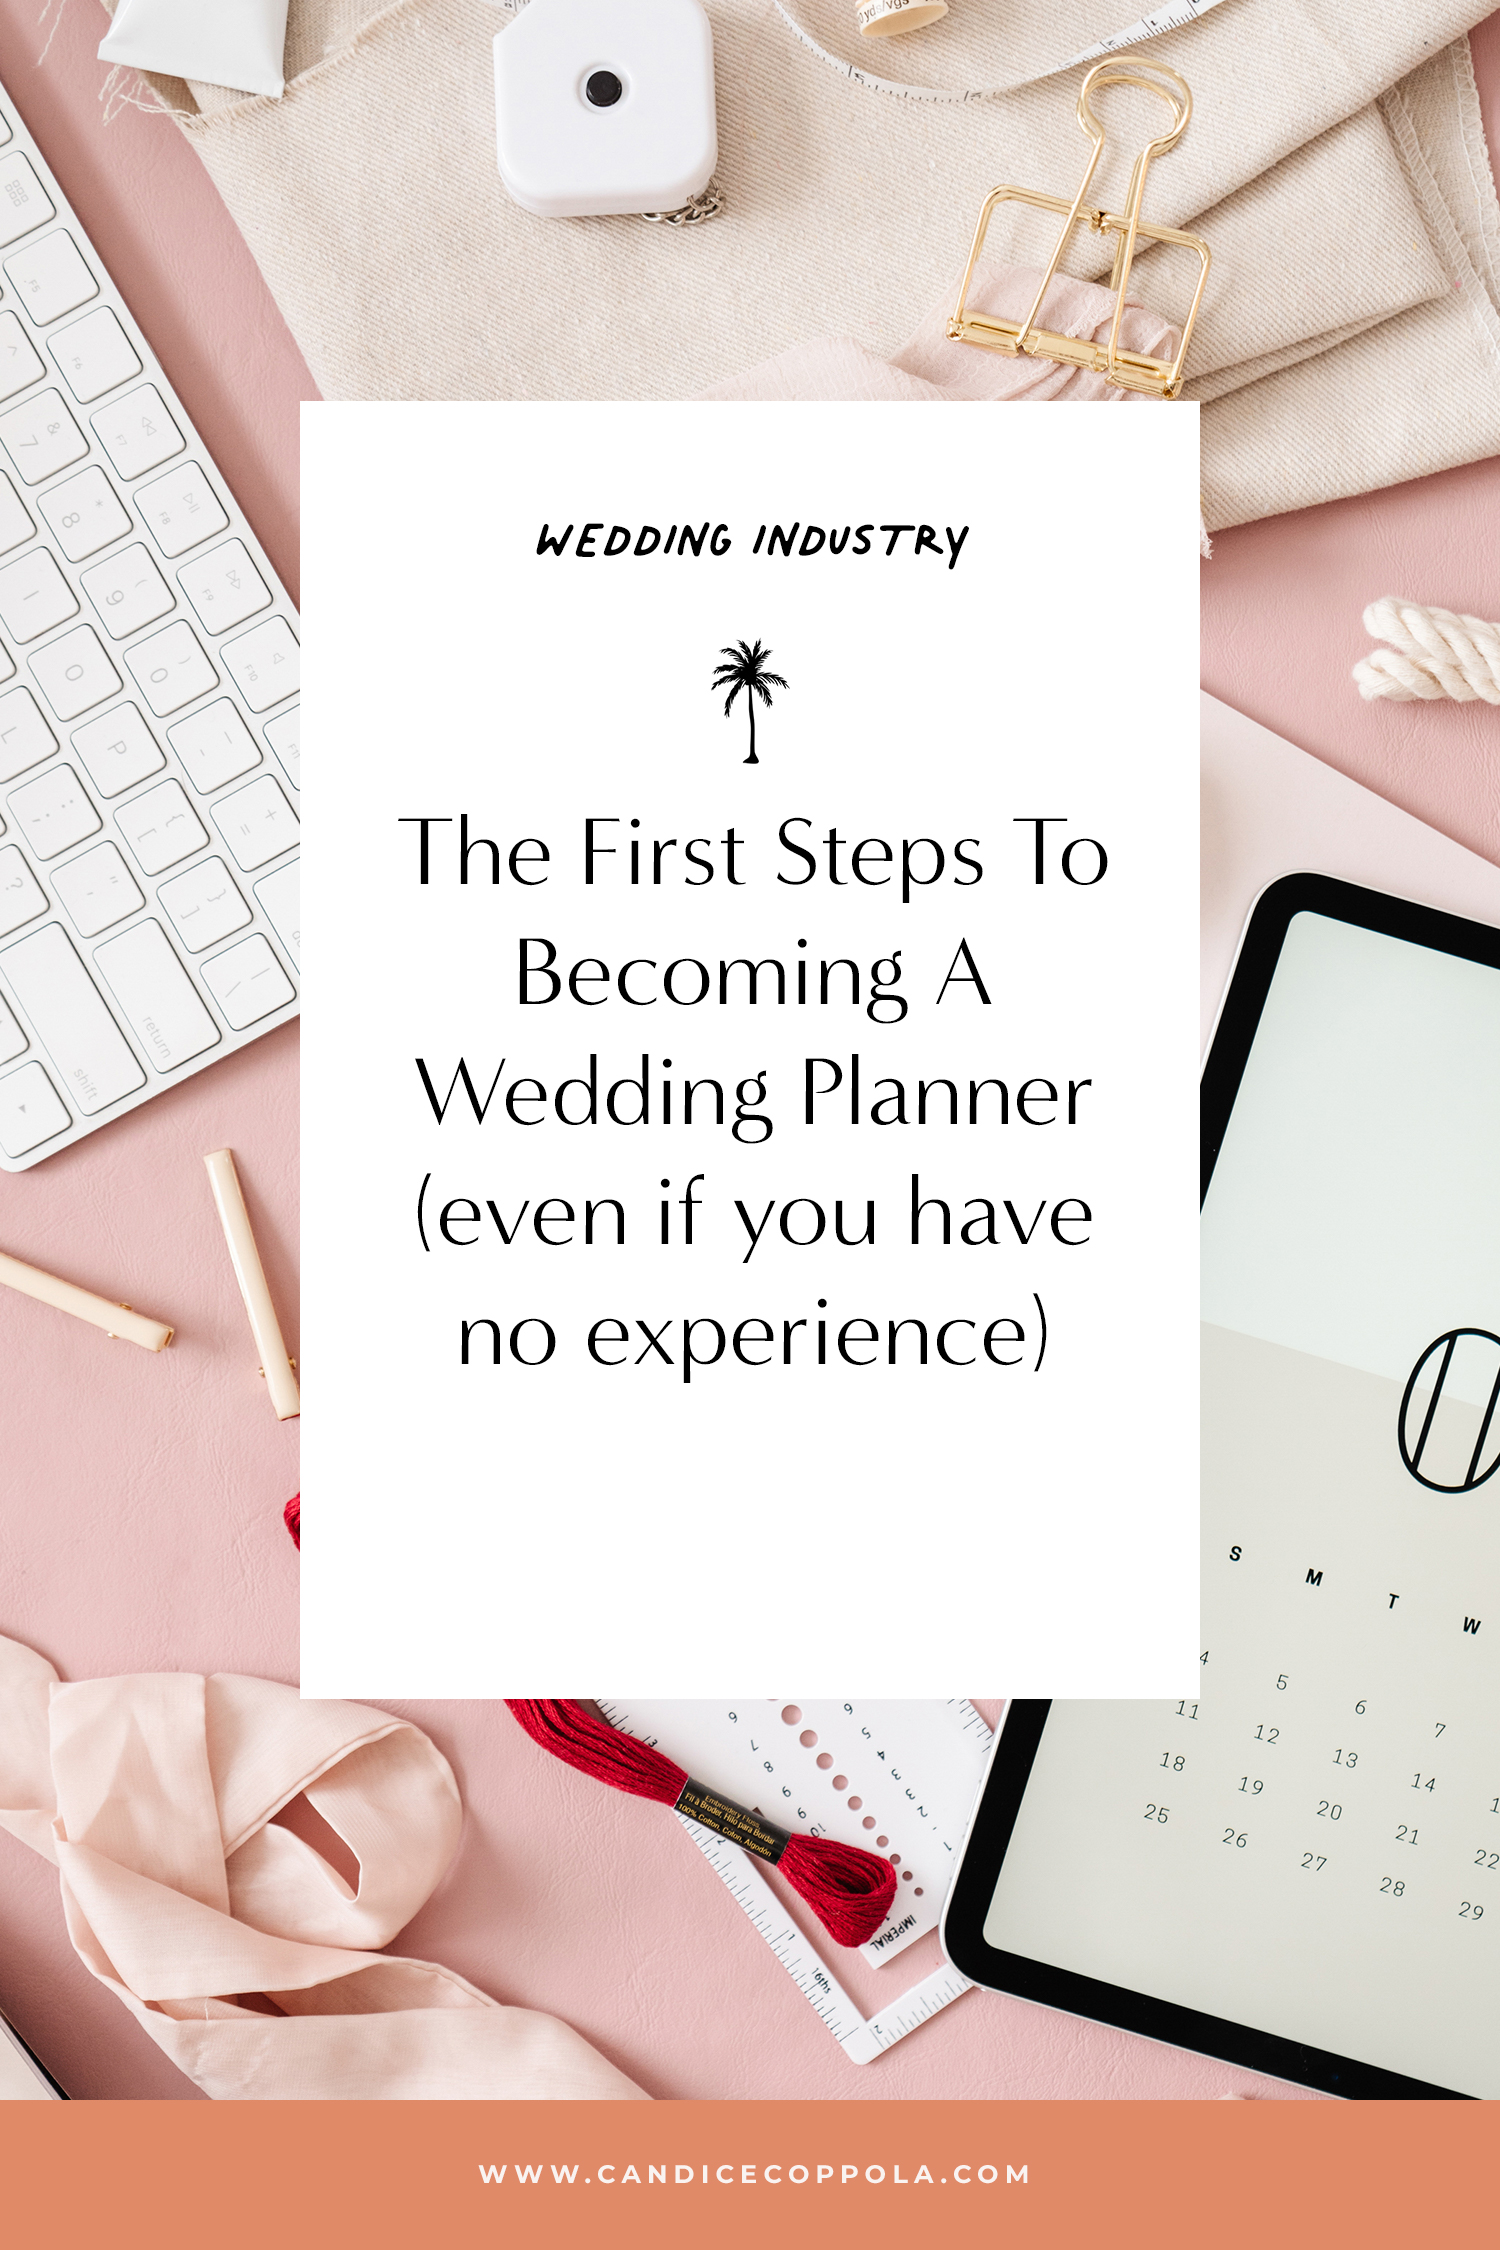 so-you-want-to-become-a-wedding-planner-7-things-you-should-know